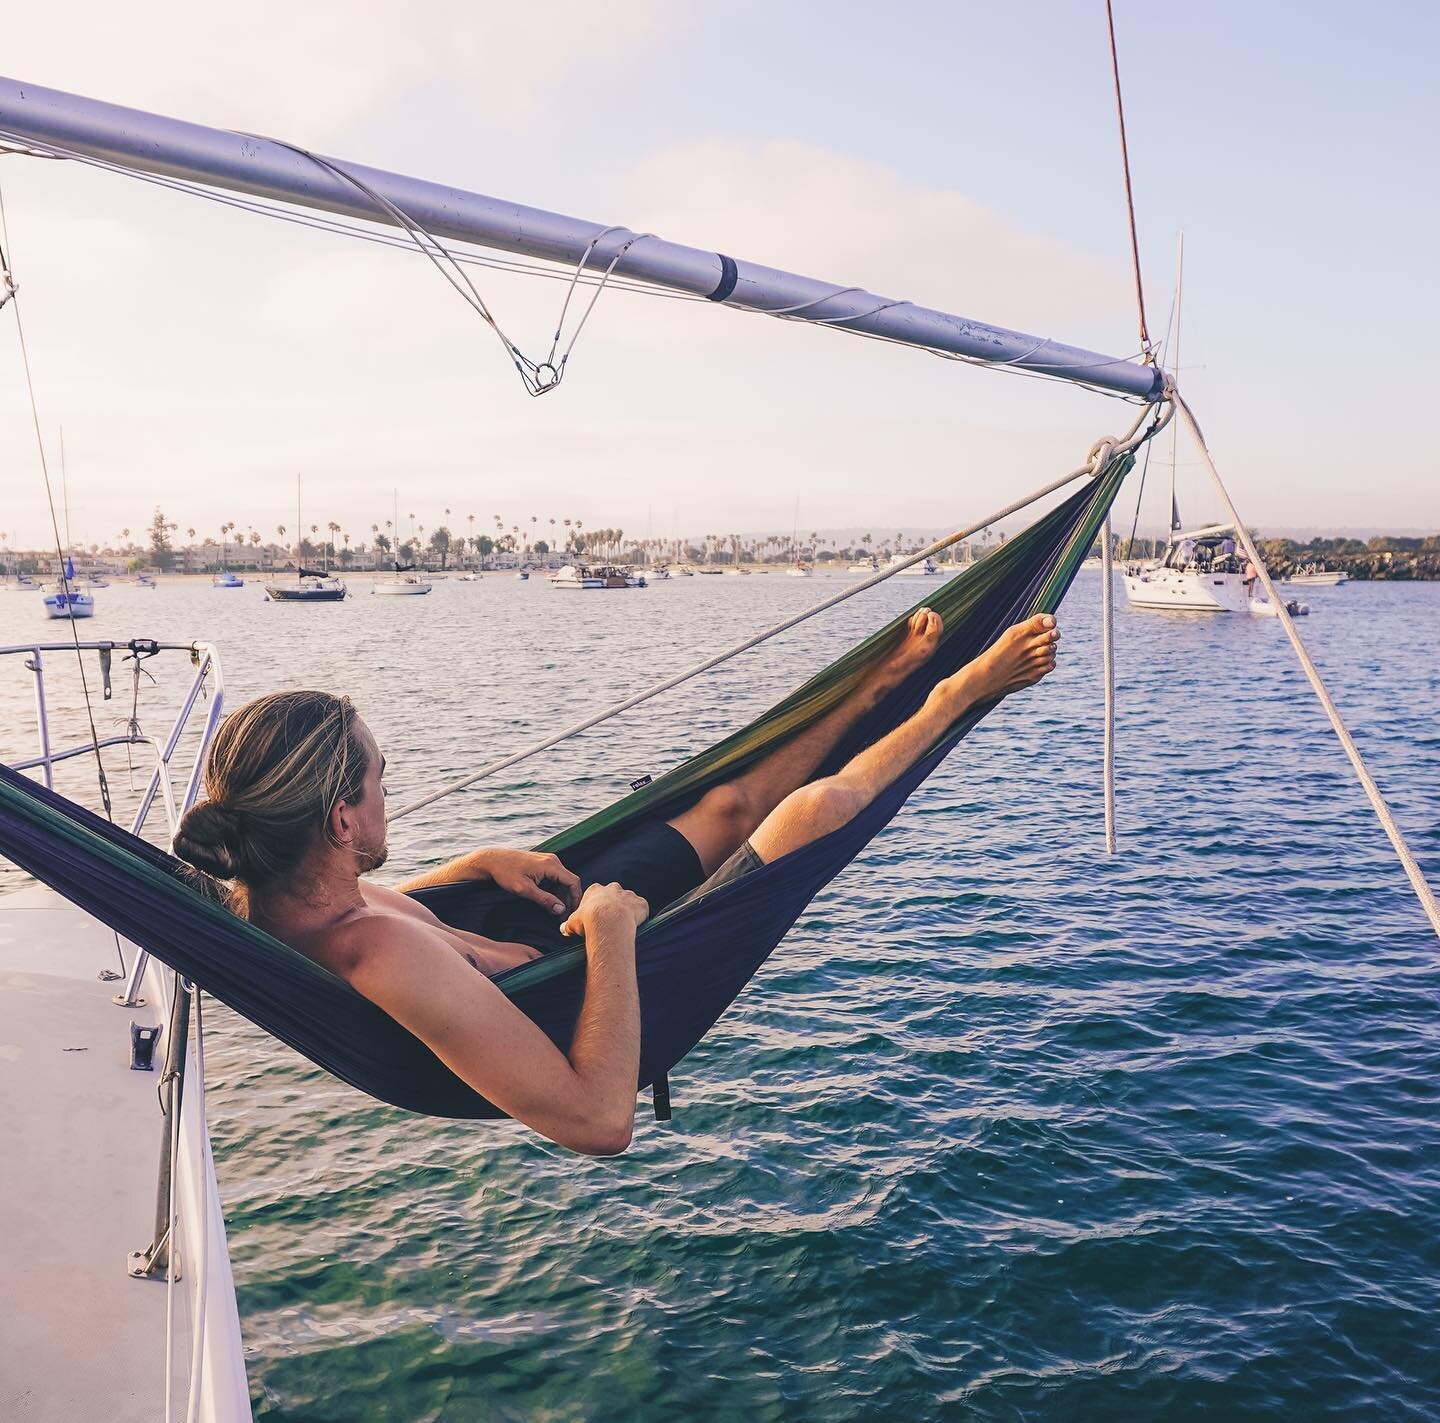 The perks of boat ownership are still proving to be great after all these years. 

#sail #sailing #sailboat #boat #boatlife #boating #hammock #relaxing #relax #sunset #yacht #yachtlife #yachting #captain #life #lifestyle #happy #happiness #travel #ex